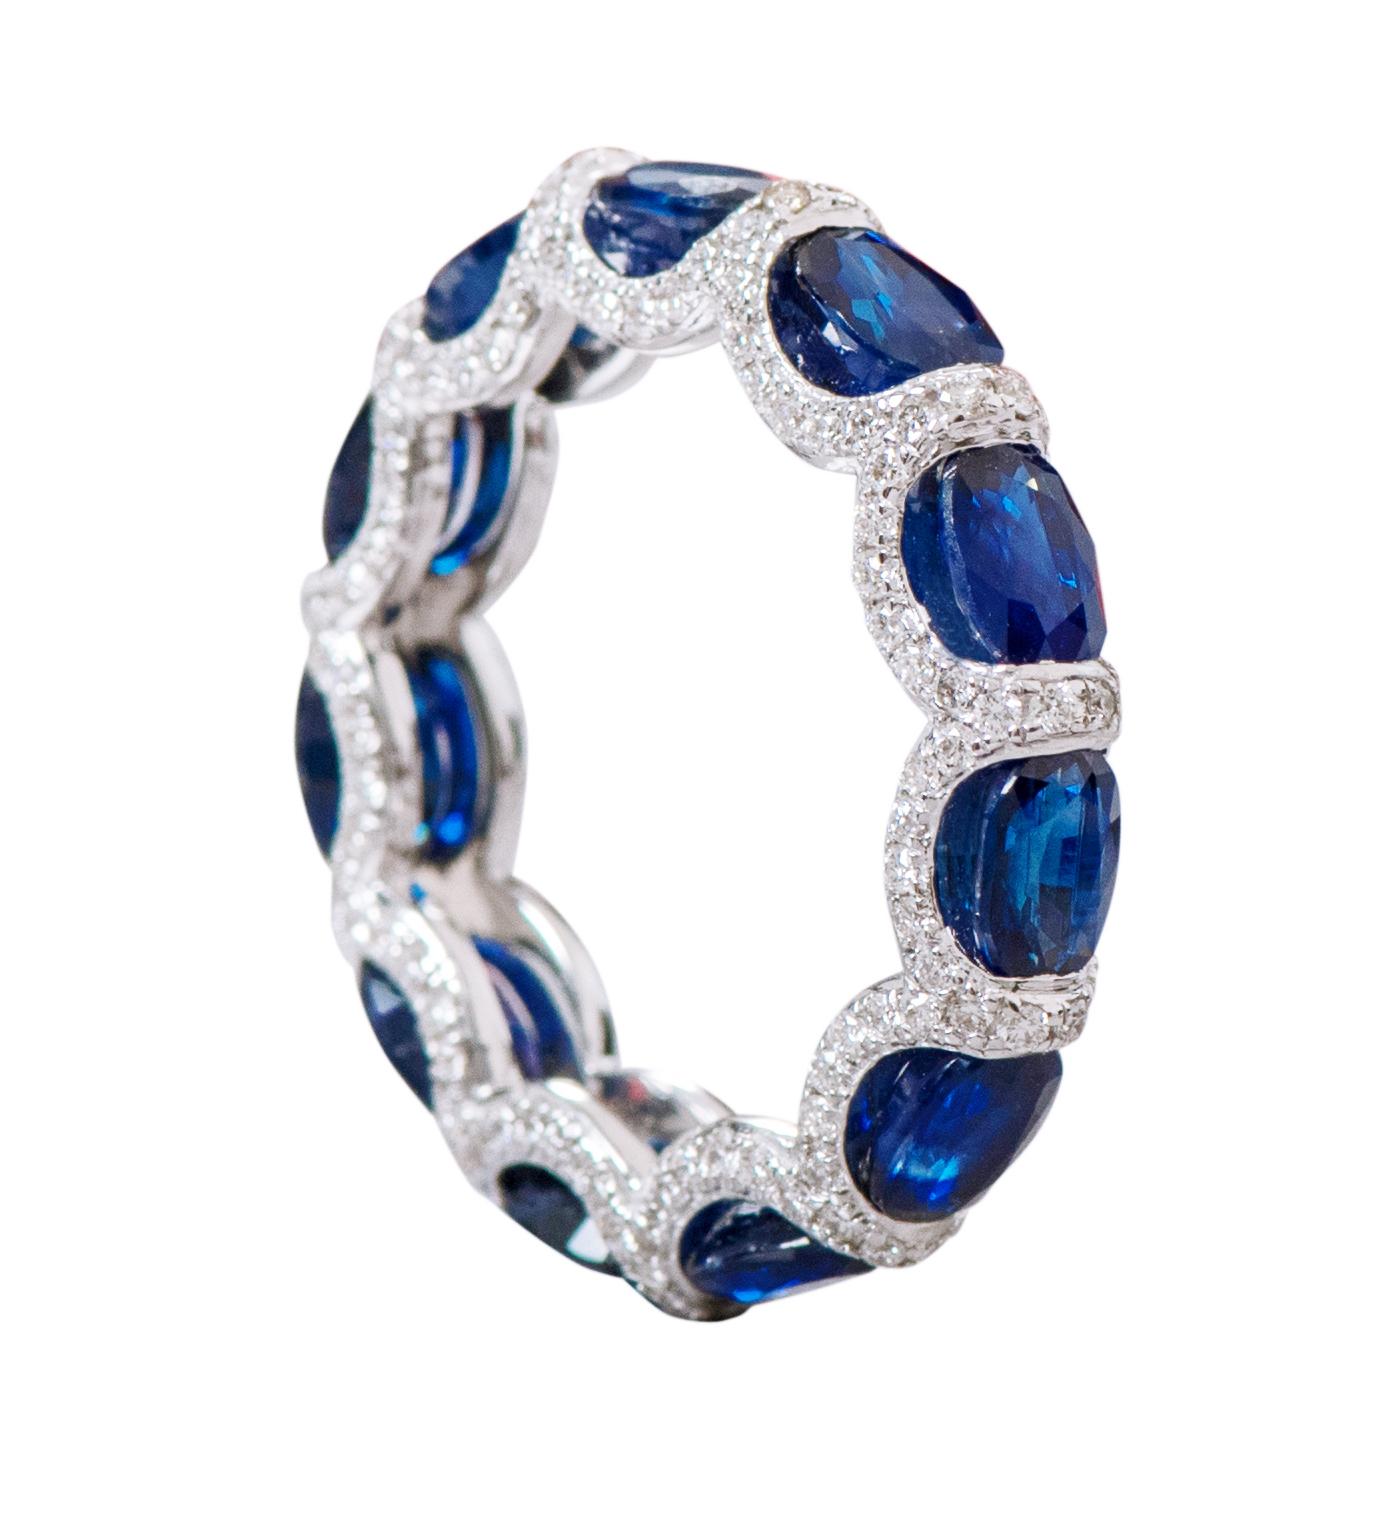 18 Karat White Gold 6.11 Carat Sapphire and Diamond Eternity Band Ring 

This impressive royal blue sapphire and diamond band is elegant. The solitaire horizontally placed oval shape sapphires are brilliantly enclosed in between pave set round